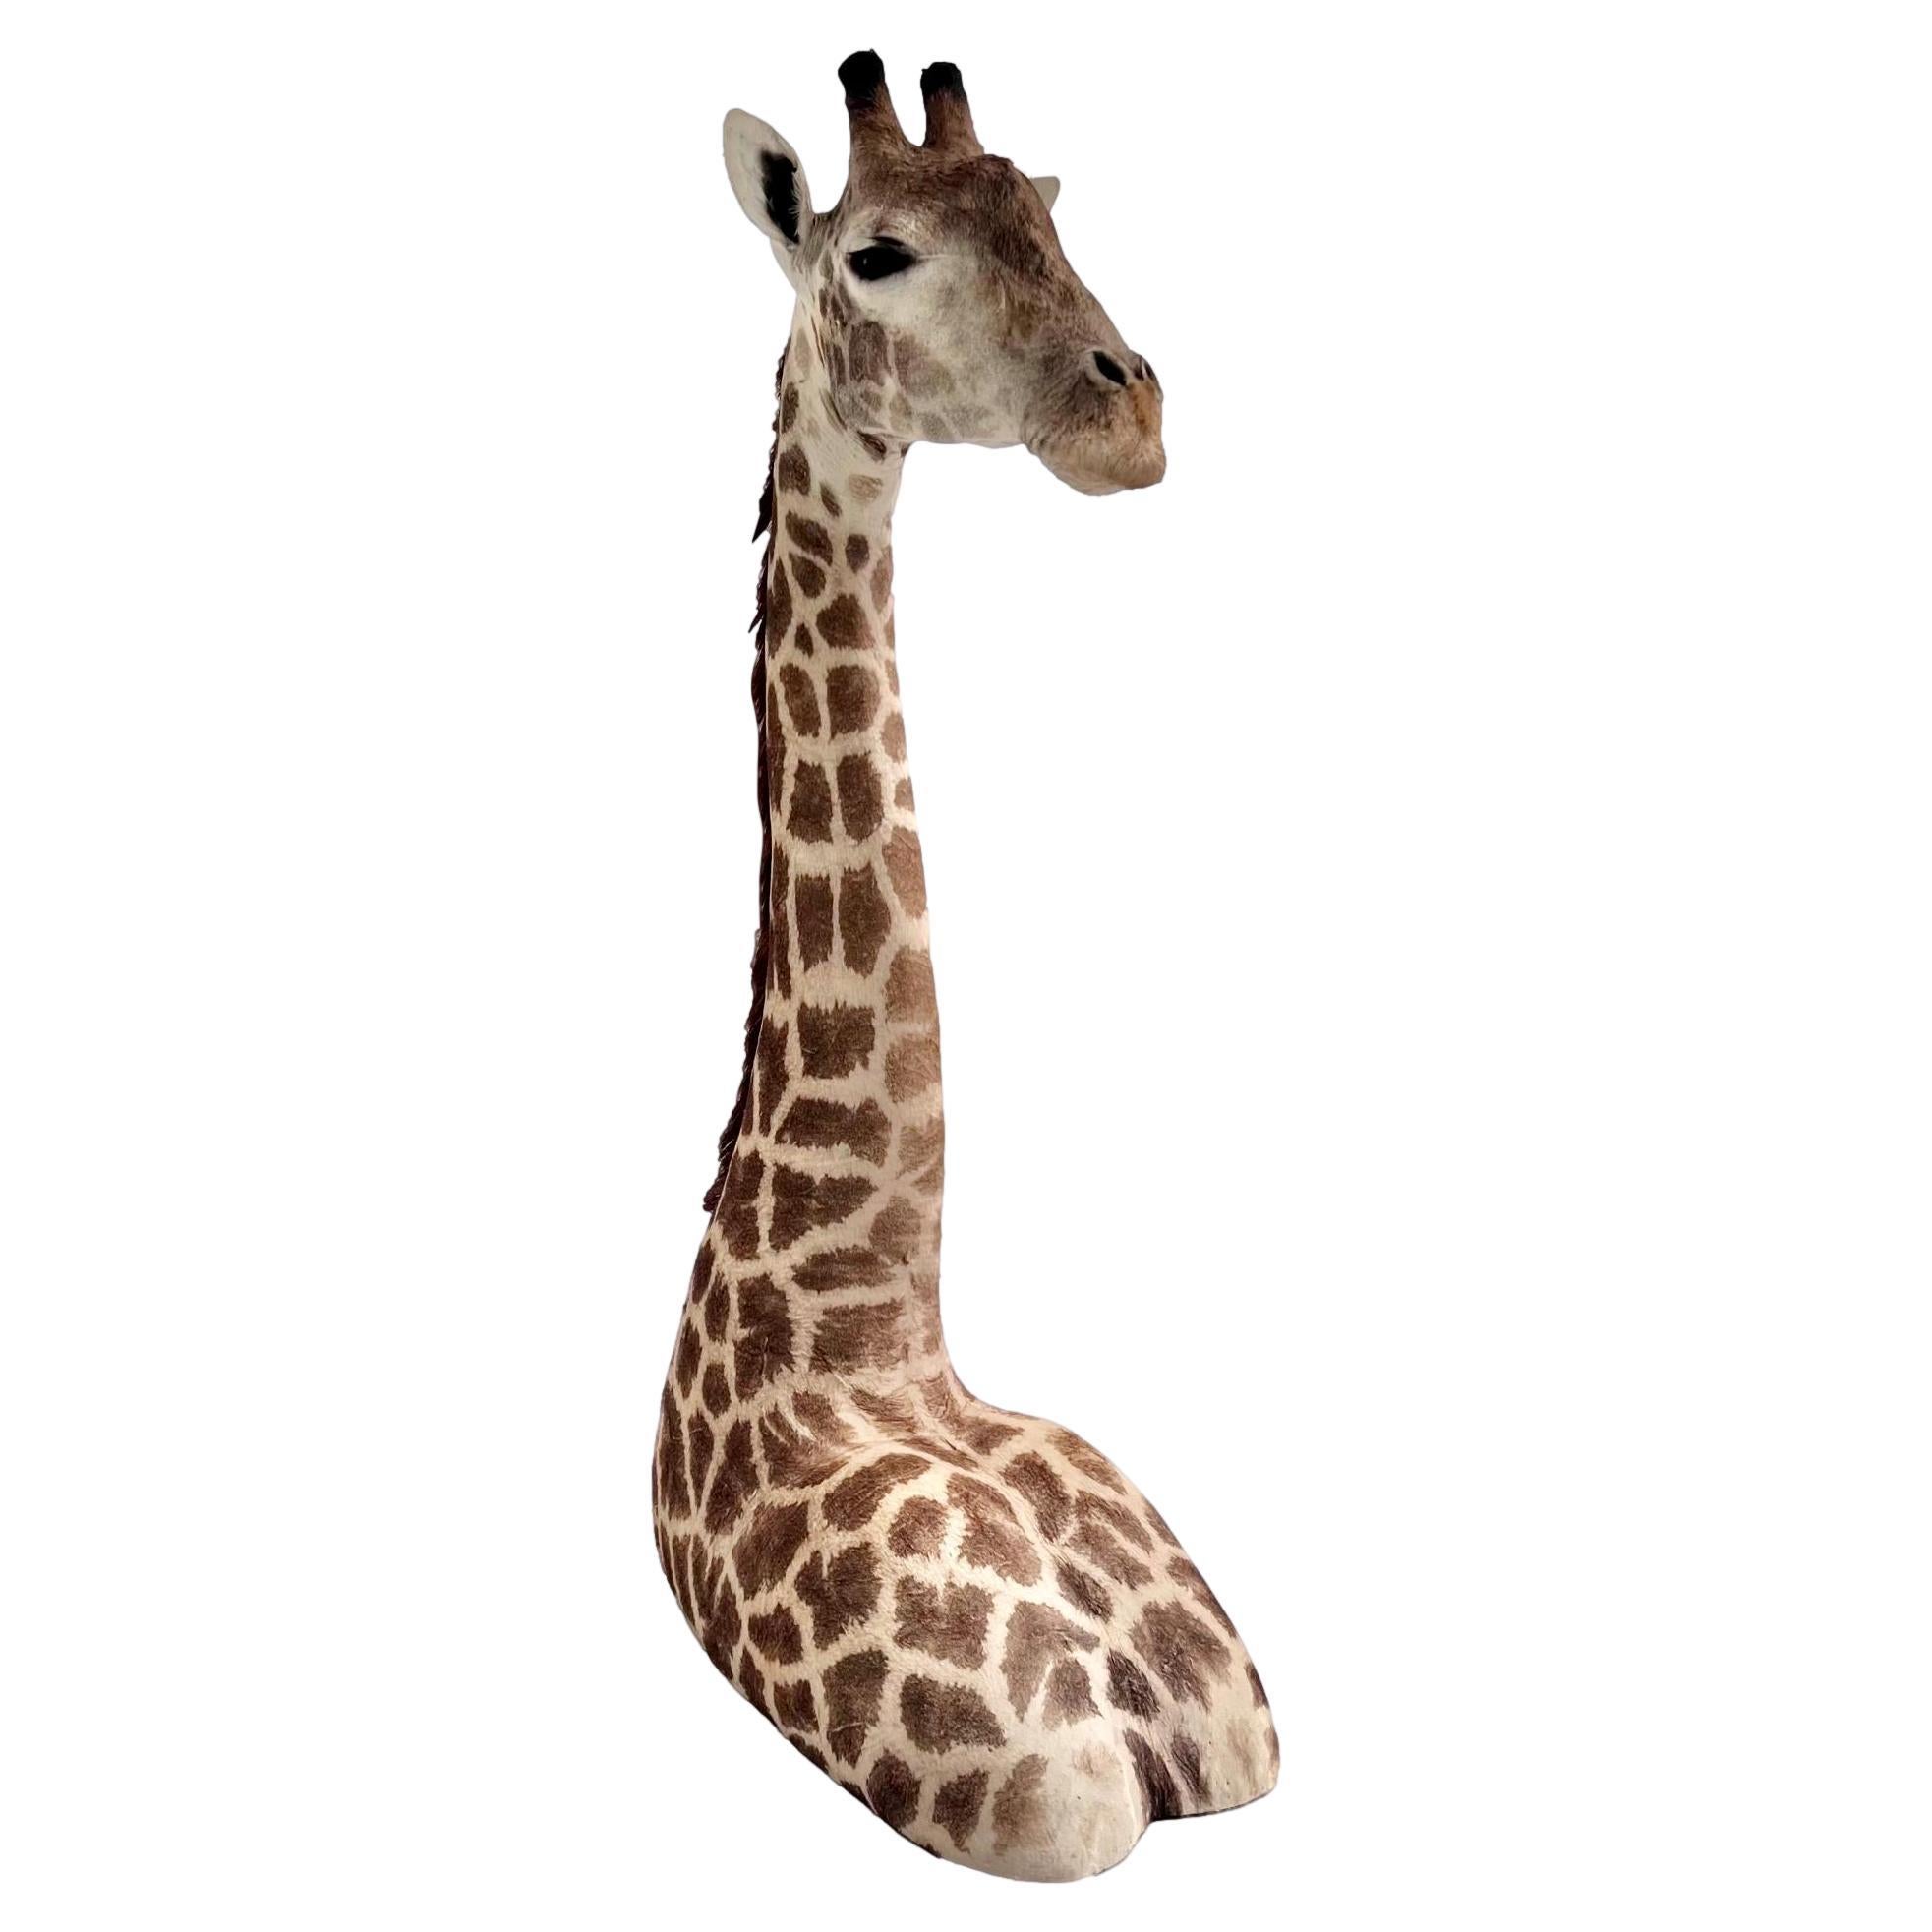 Majestic vintage Giraffe taxidermy mount. Over 7-feet tall. Meticulously crafted by skilled artisans, ensuring that every detail was captured to perfection.

This mount is a unique and rare find, bringing a touch of African elegance to your